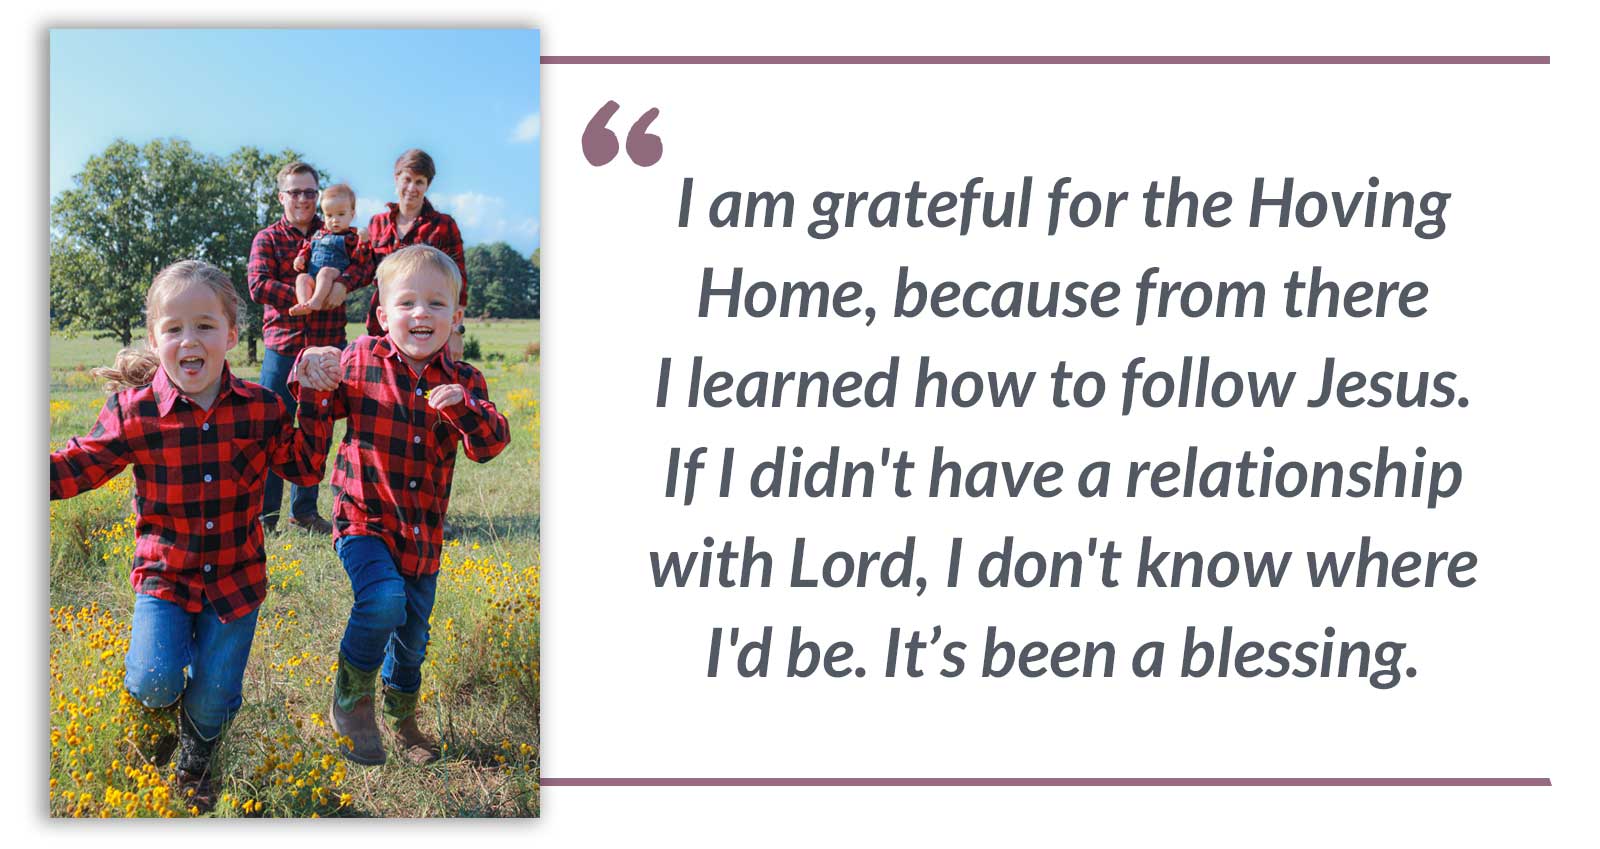 I am grateful for the Hoving Home, because from there I learned how to follow Jesus. If I didn't have a relationship with Lord, I don't know where I'd be. It’s been a blessing.-Emily